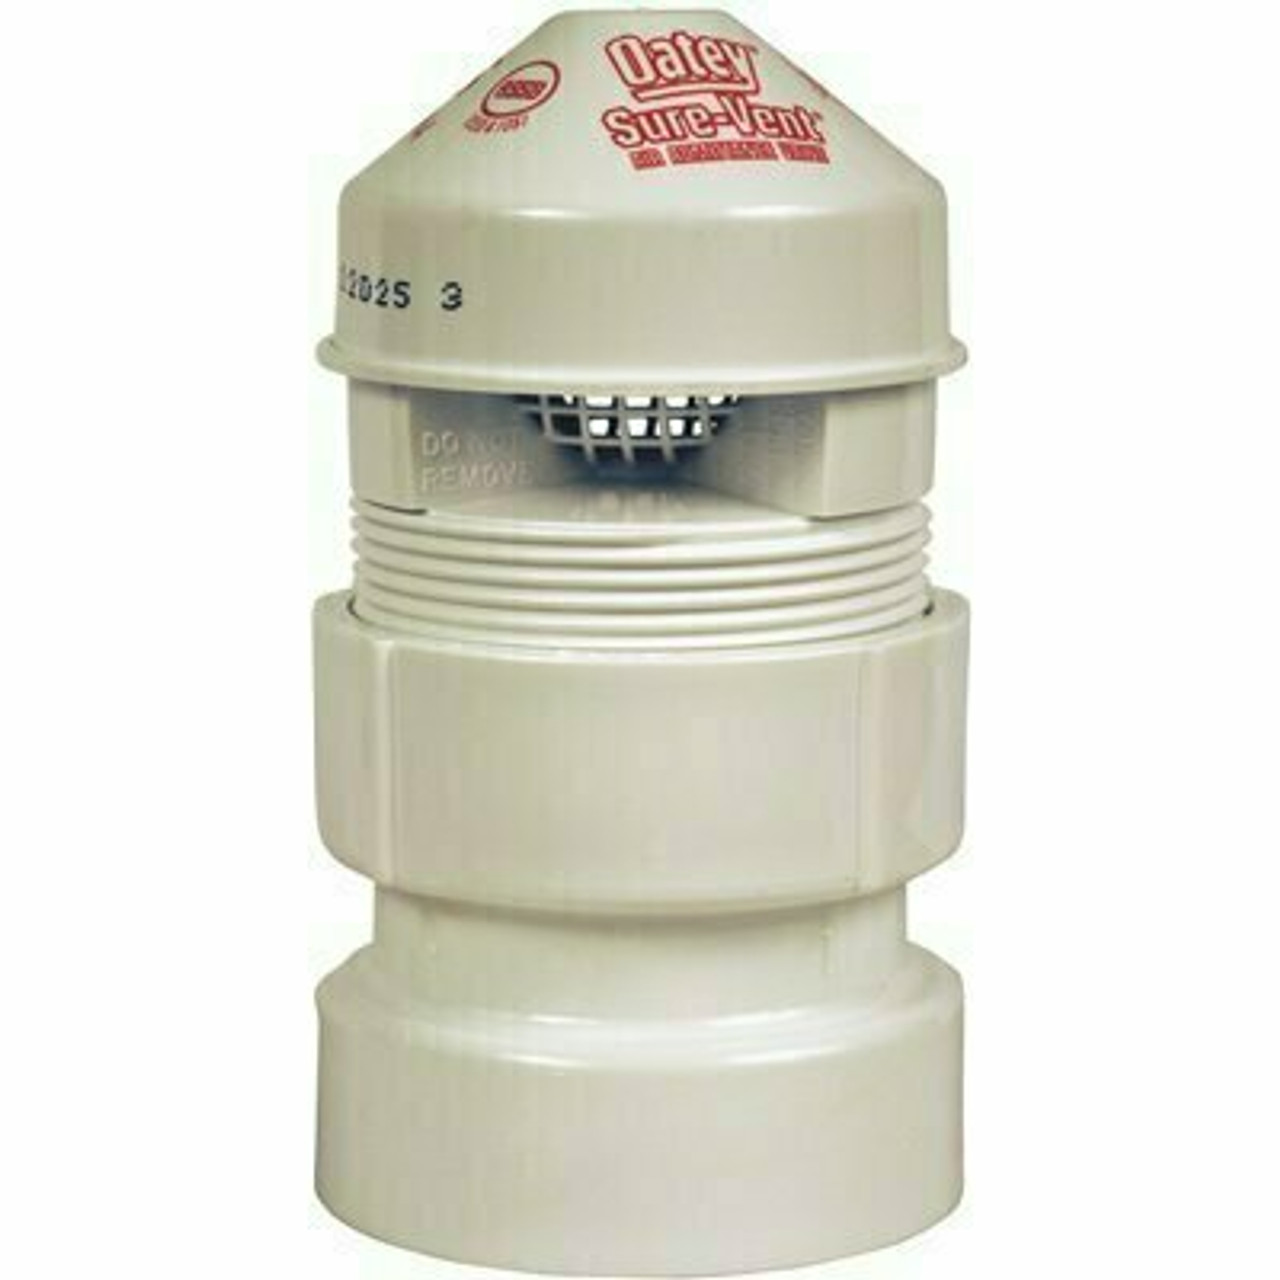 Oatey Sure-Vent 1-1/2 In. X 2 In. Pvc Air Admittance Valve With 160 Dfu Branch And 24 Dfu Stack